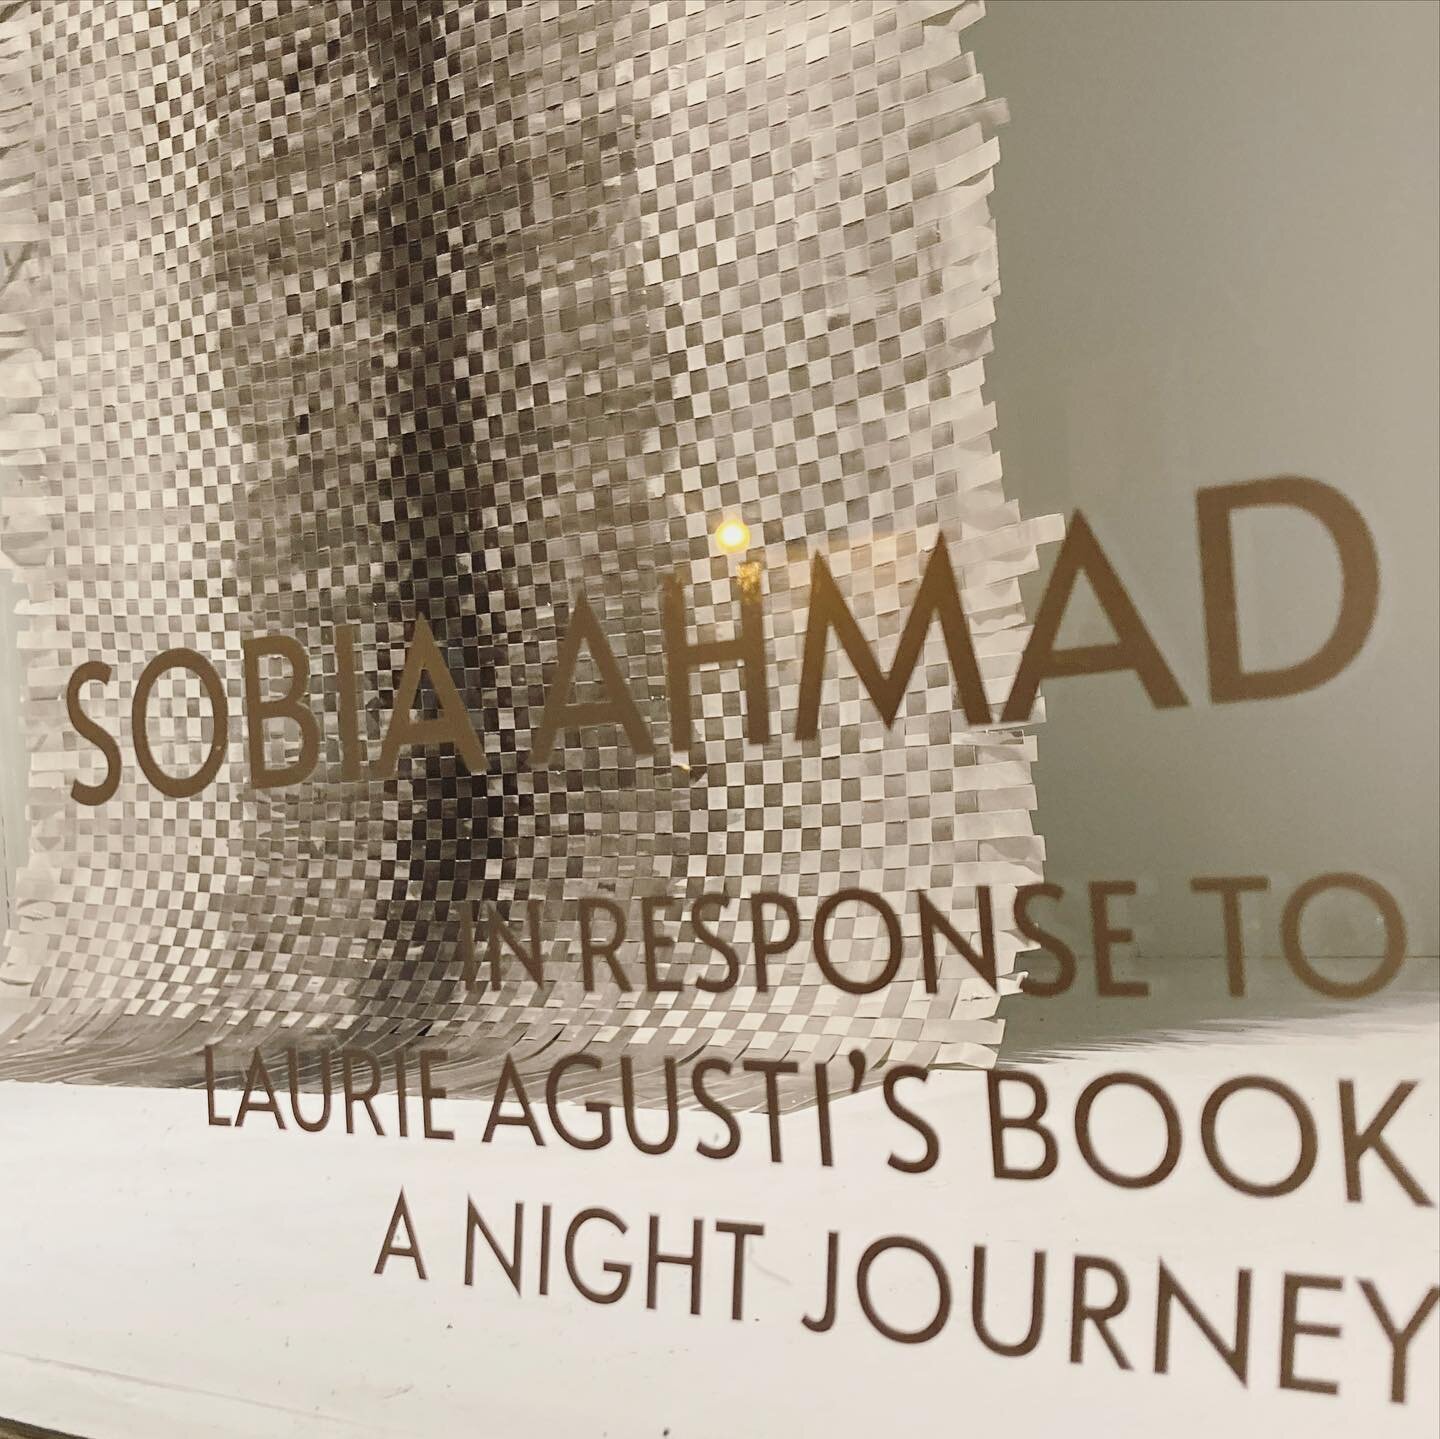 NEW ✨ on view now through January 23rd are the last two exhibitions from our Window to Europe series, featuring exhibitions by Sobia Ahmad (@sobia.ahmad.art) in response to &ldquo;A Night Journey&rdquo; by French author and illustrator Laurie Agusti 